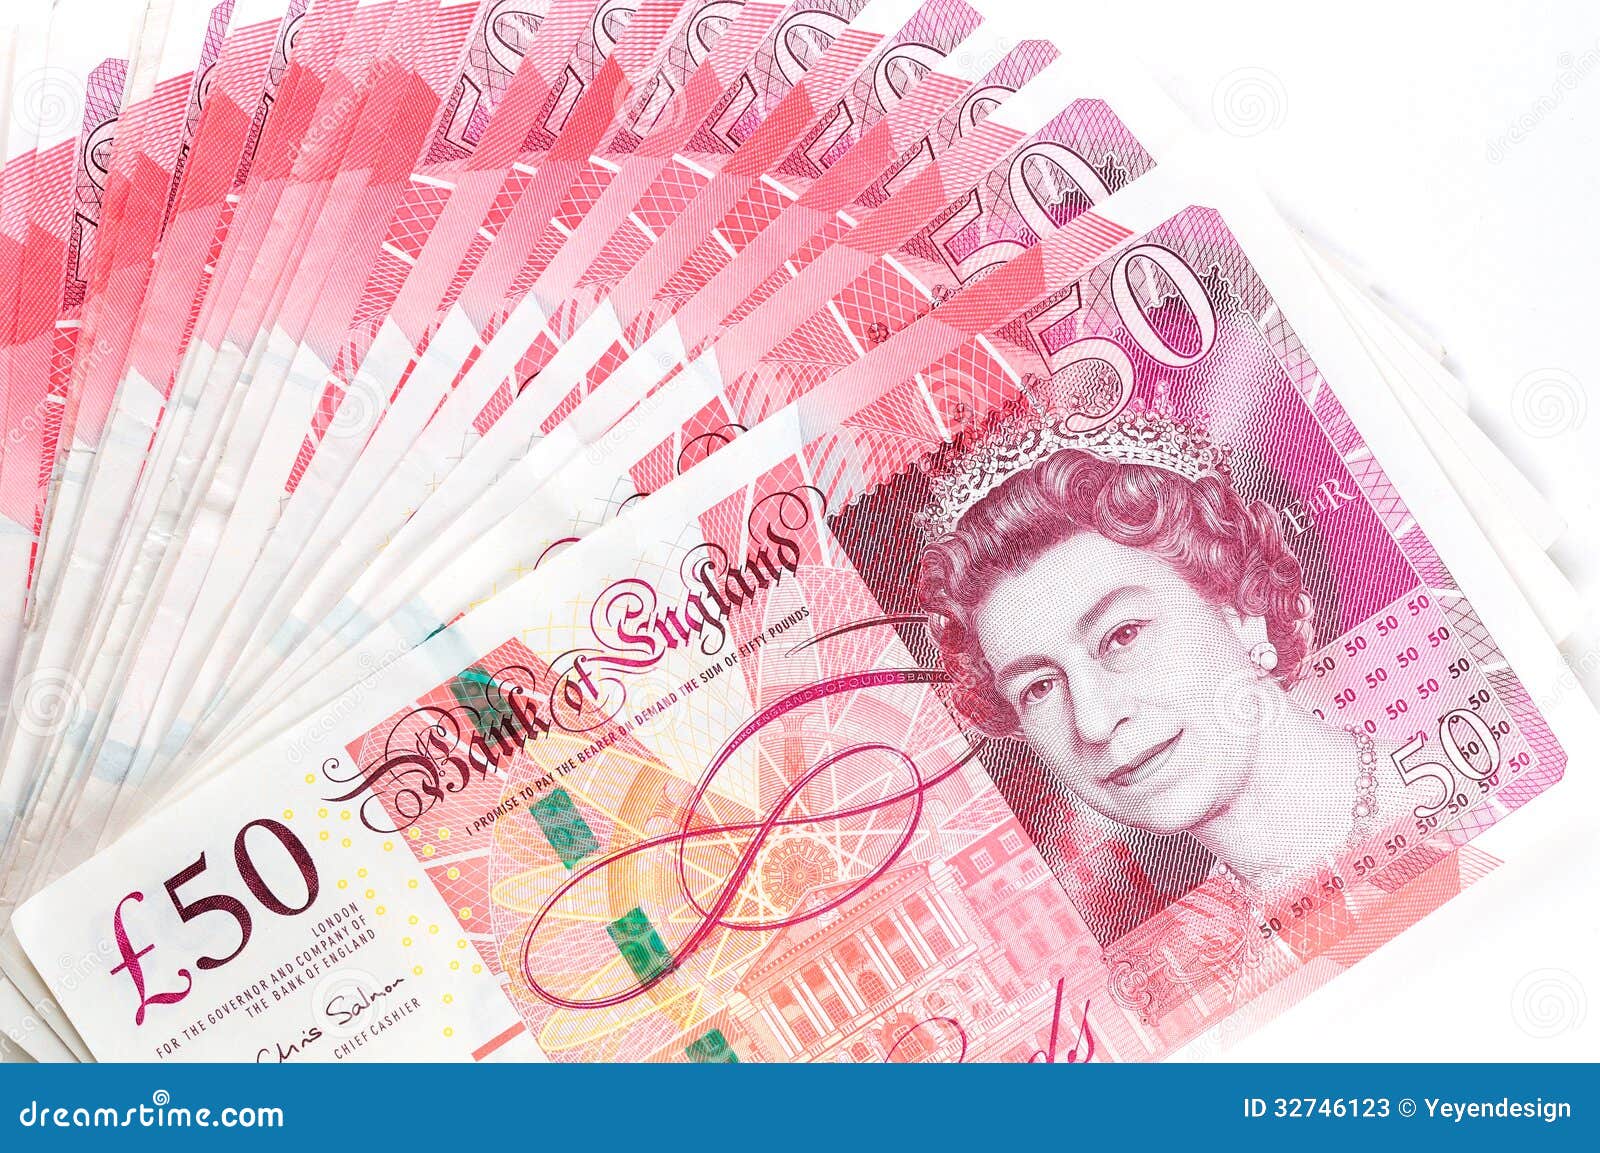 United Kingdom new 50-pound note (B206a) reported for introduction on ...